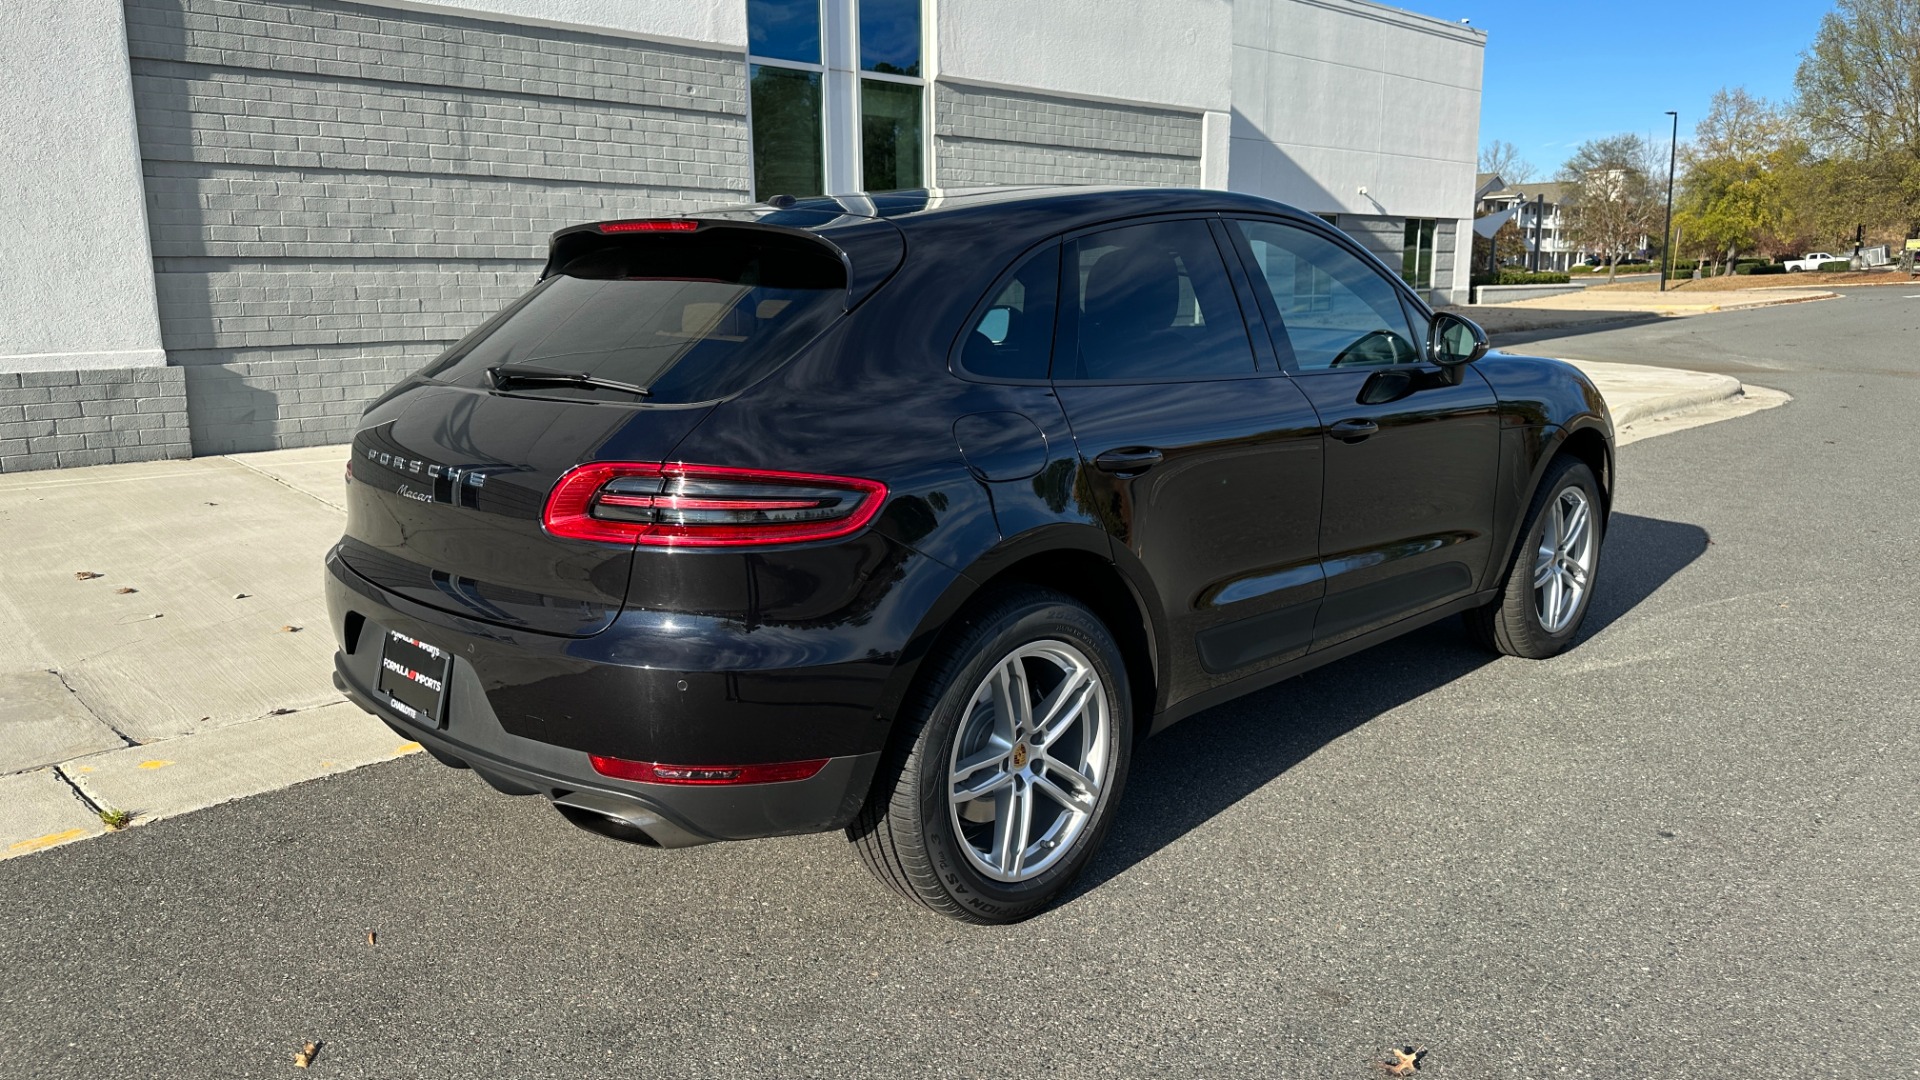 Used 2018 Porsche Macan SPORT EDITION / PREMIUM PLUS PACKAGE / BOSE SOUND / NAV / LANGE CHANGE ASSI for sale $39,900 at Formula Imports in Charlotte NC 28227 6